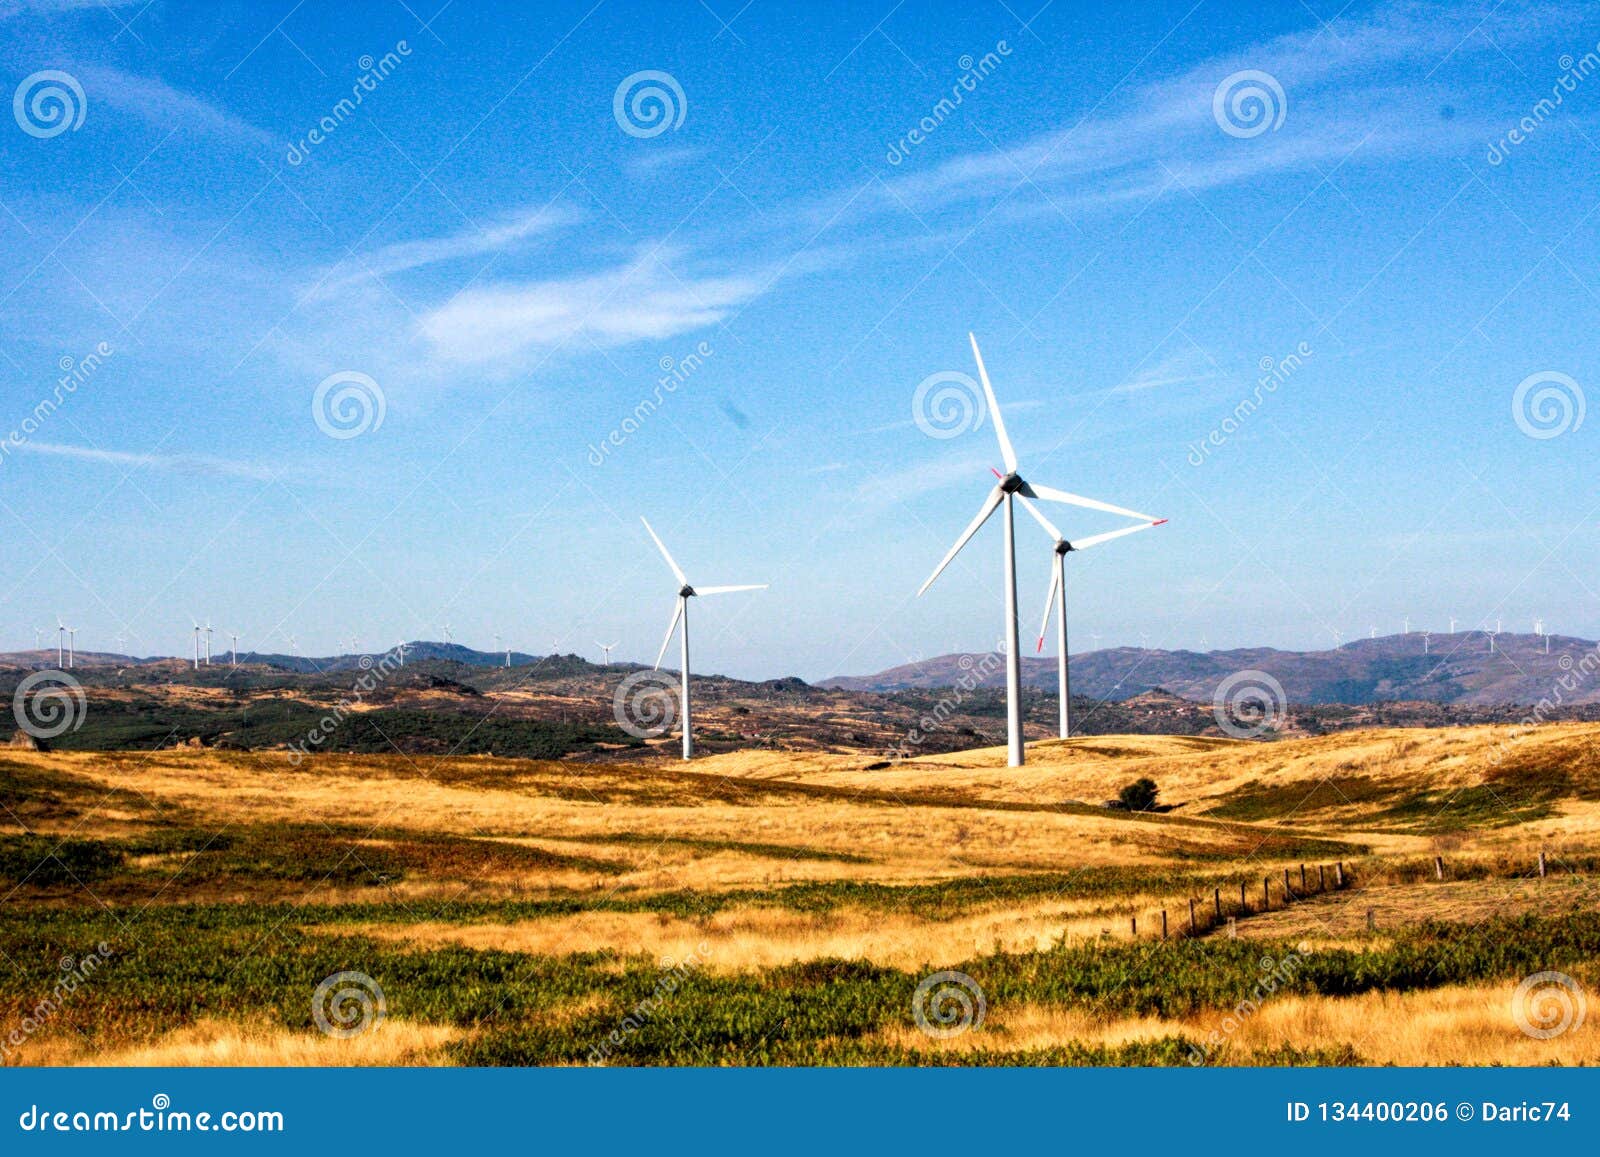 wind turbines on hilly expanse create energy, portugal europe